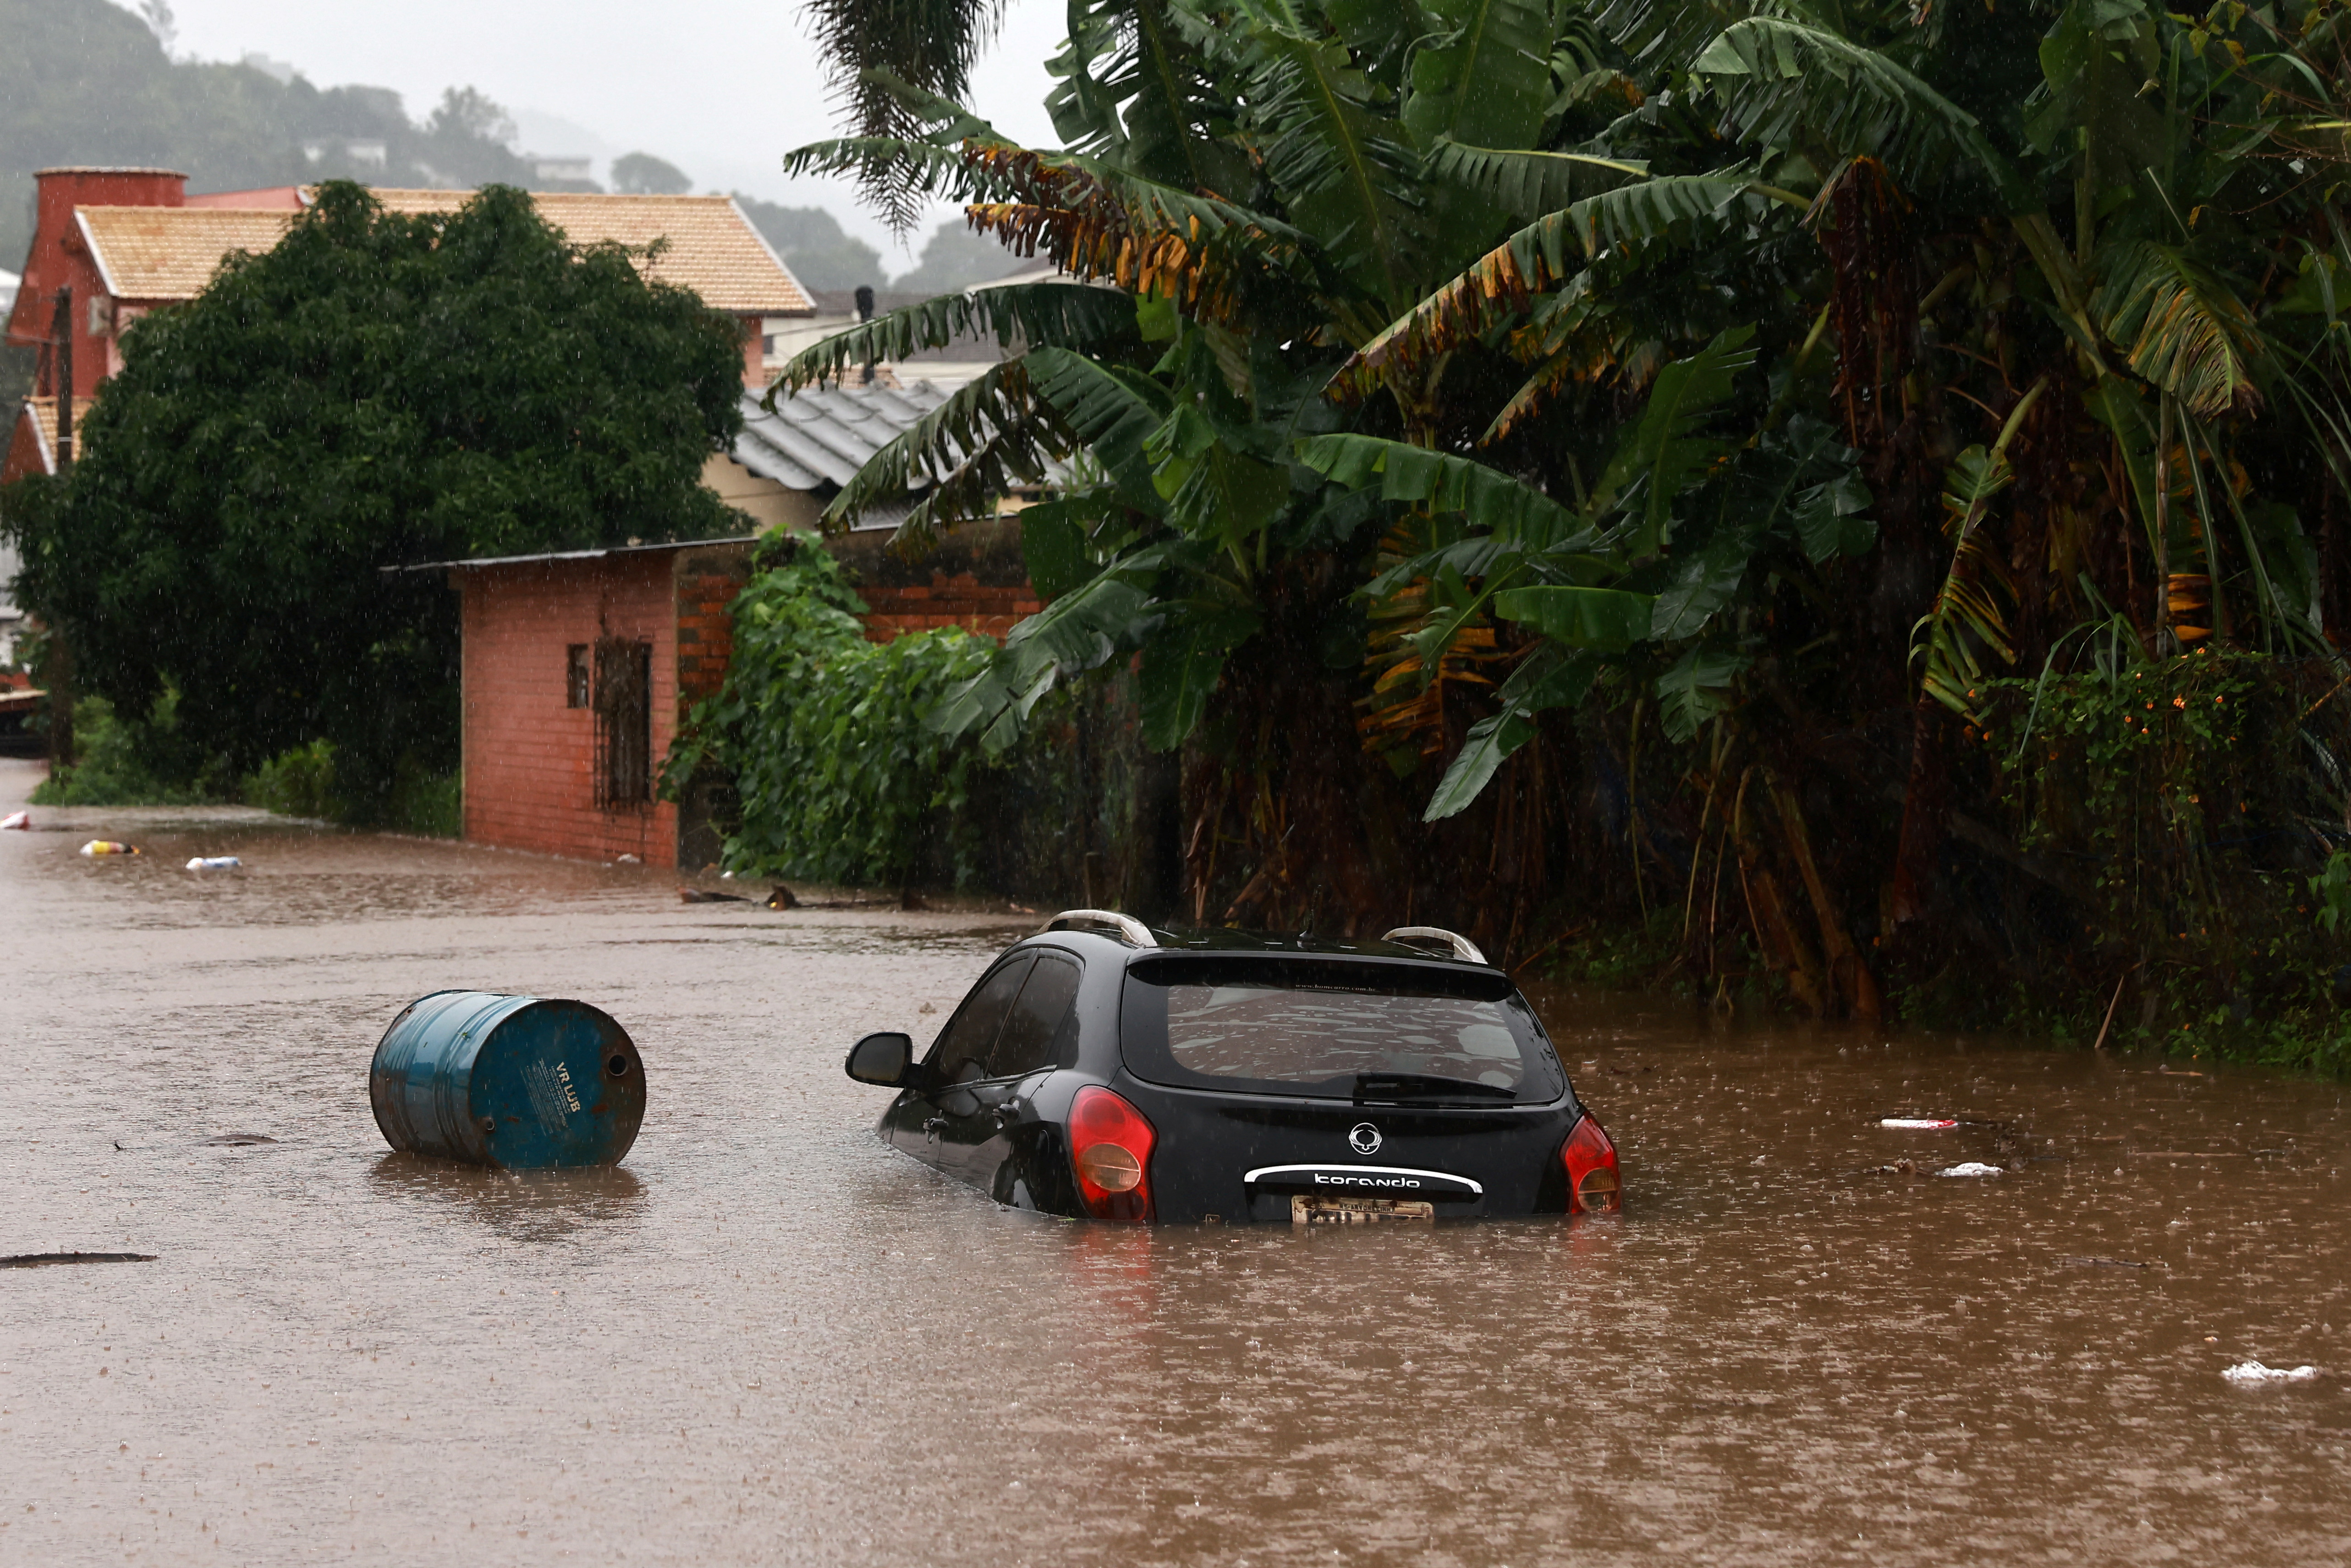 A car stands in the flooded road near the Taquari River, during heavy rains in the city of Encantado in Rio Grande do Sul